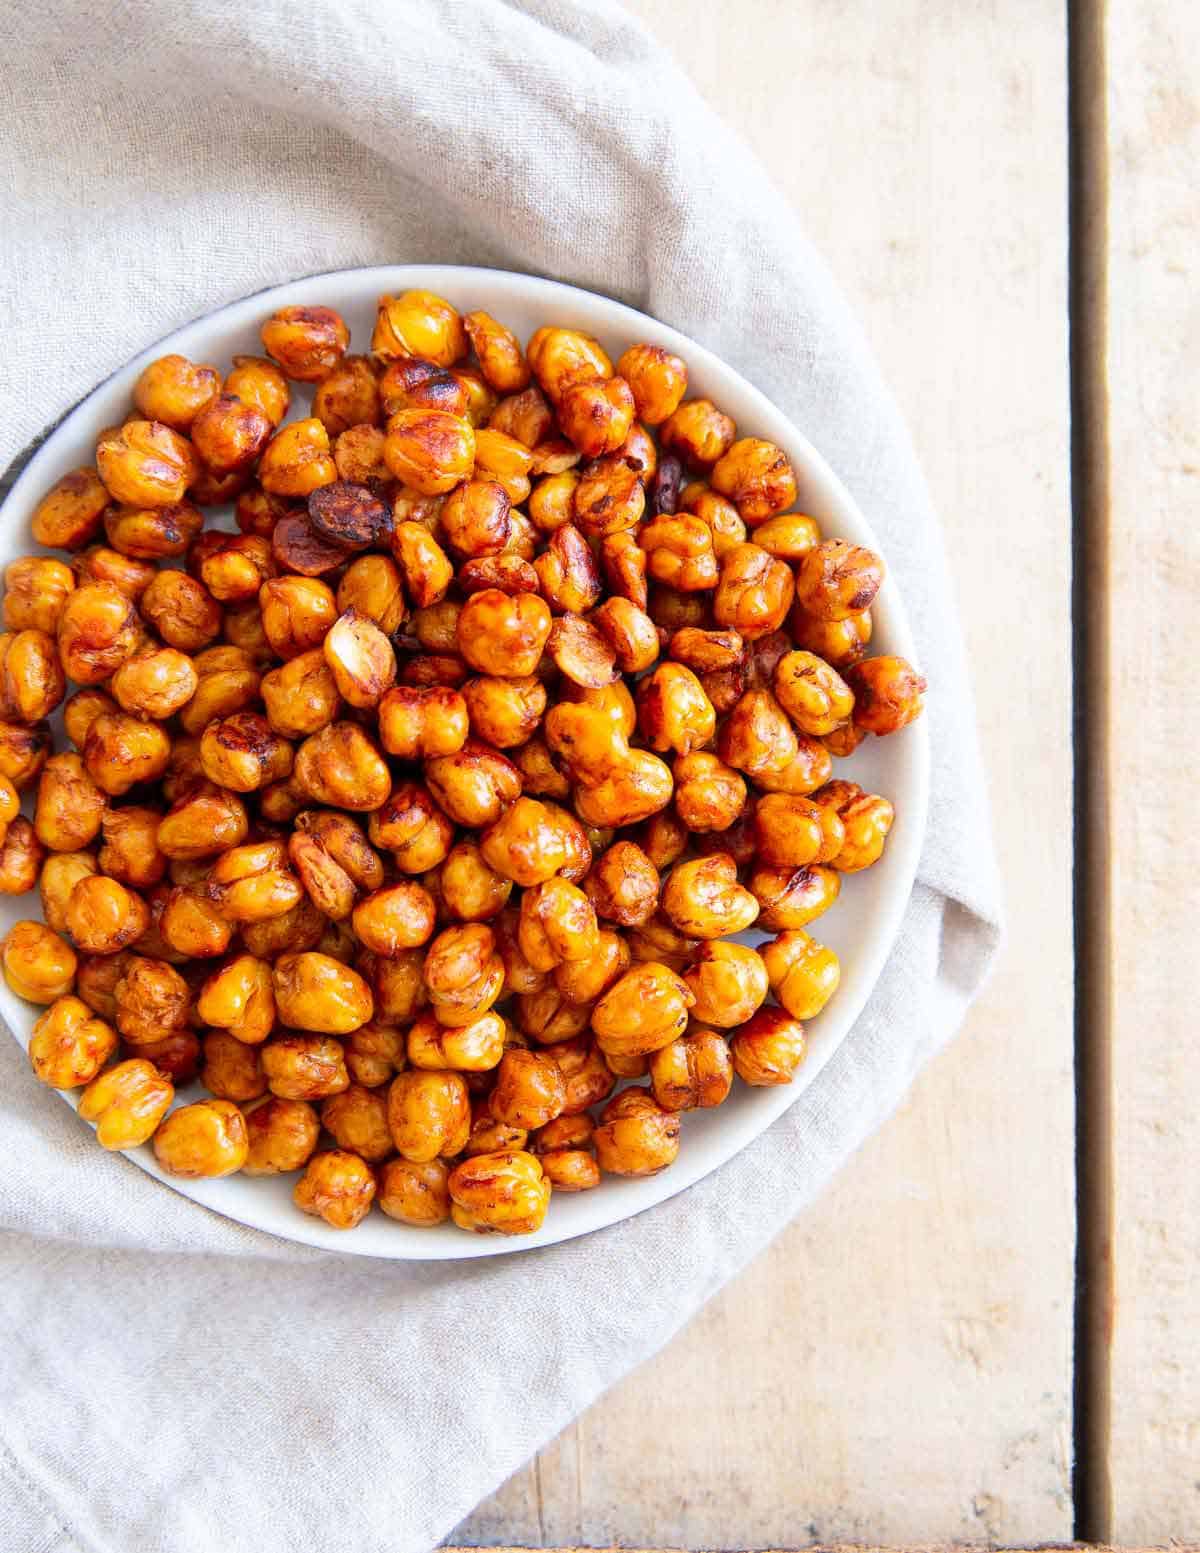 These easy, crispy, roasted BBQ chickpeas make a delicious option for healthy snacking or the perfect crunchy topper for salads.